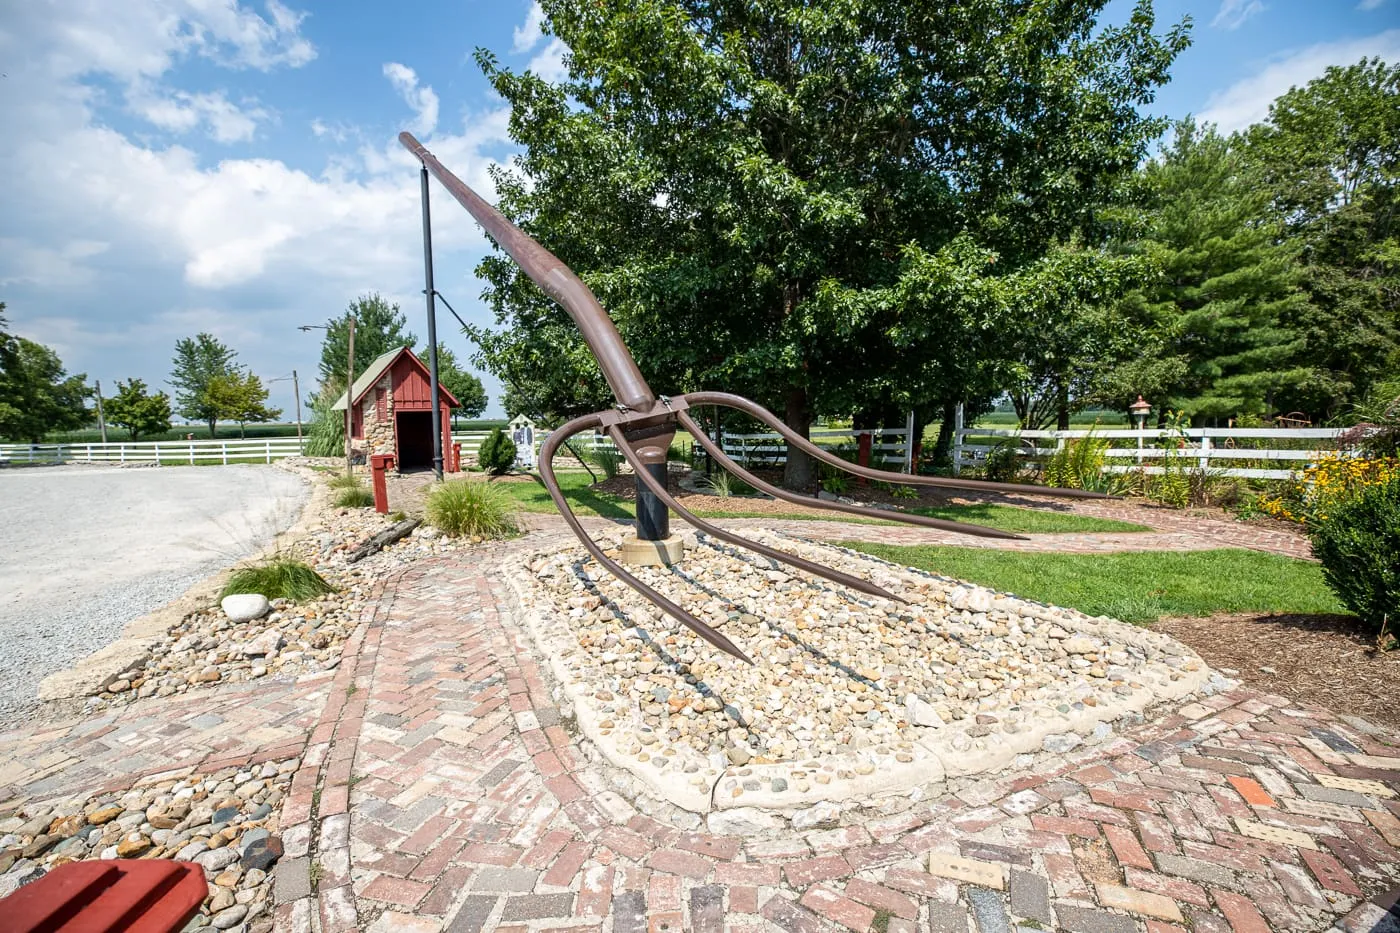 The world's largest pitchfork in Casey, Illinois